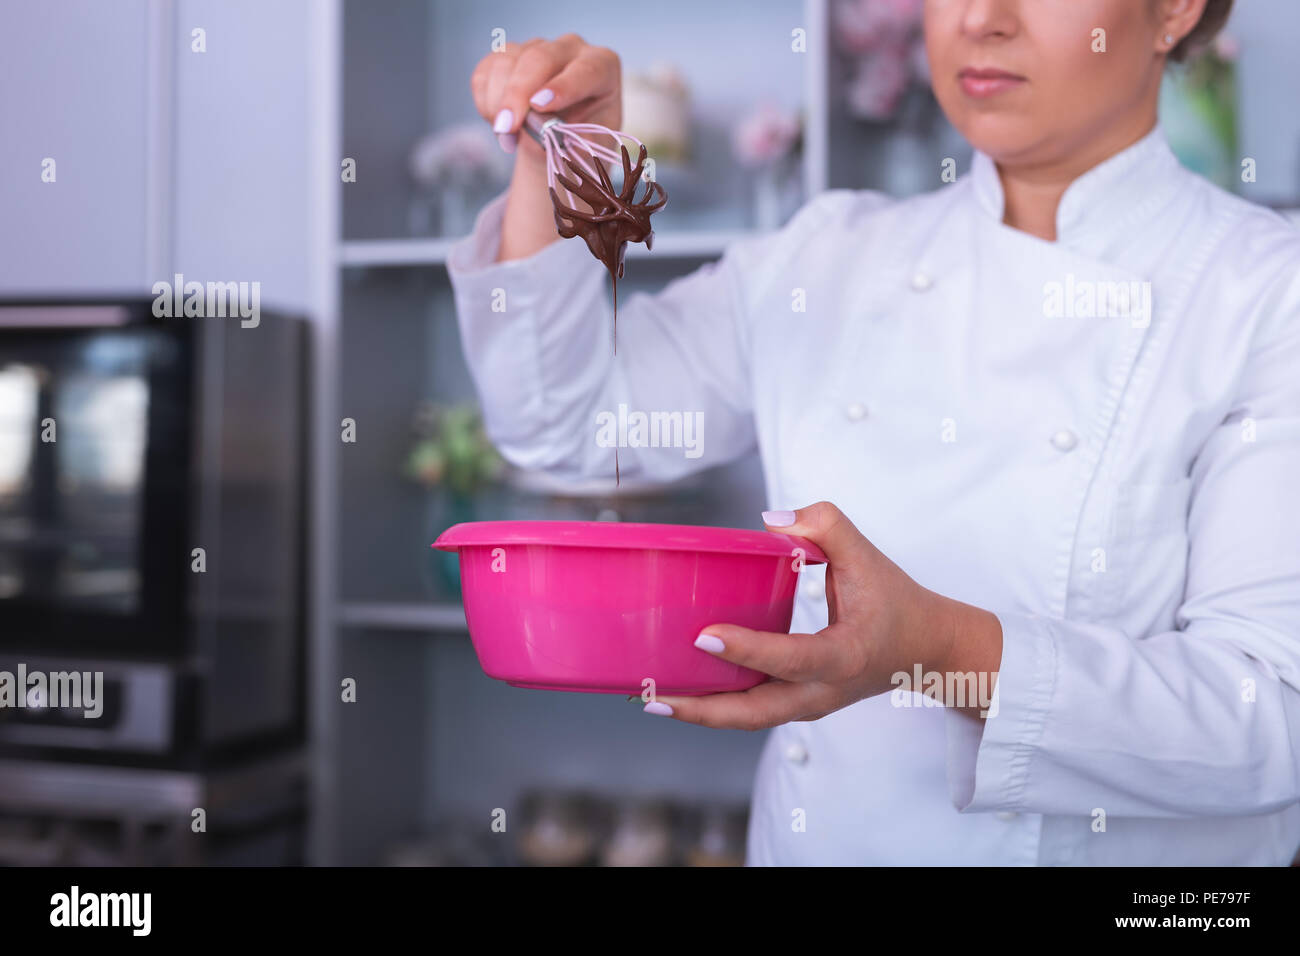 Beautiful baker holding pink bowl with chocolate mousse Stock Photo